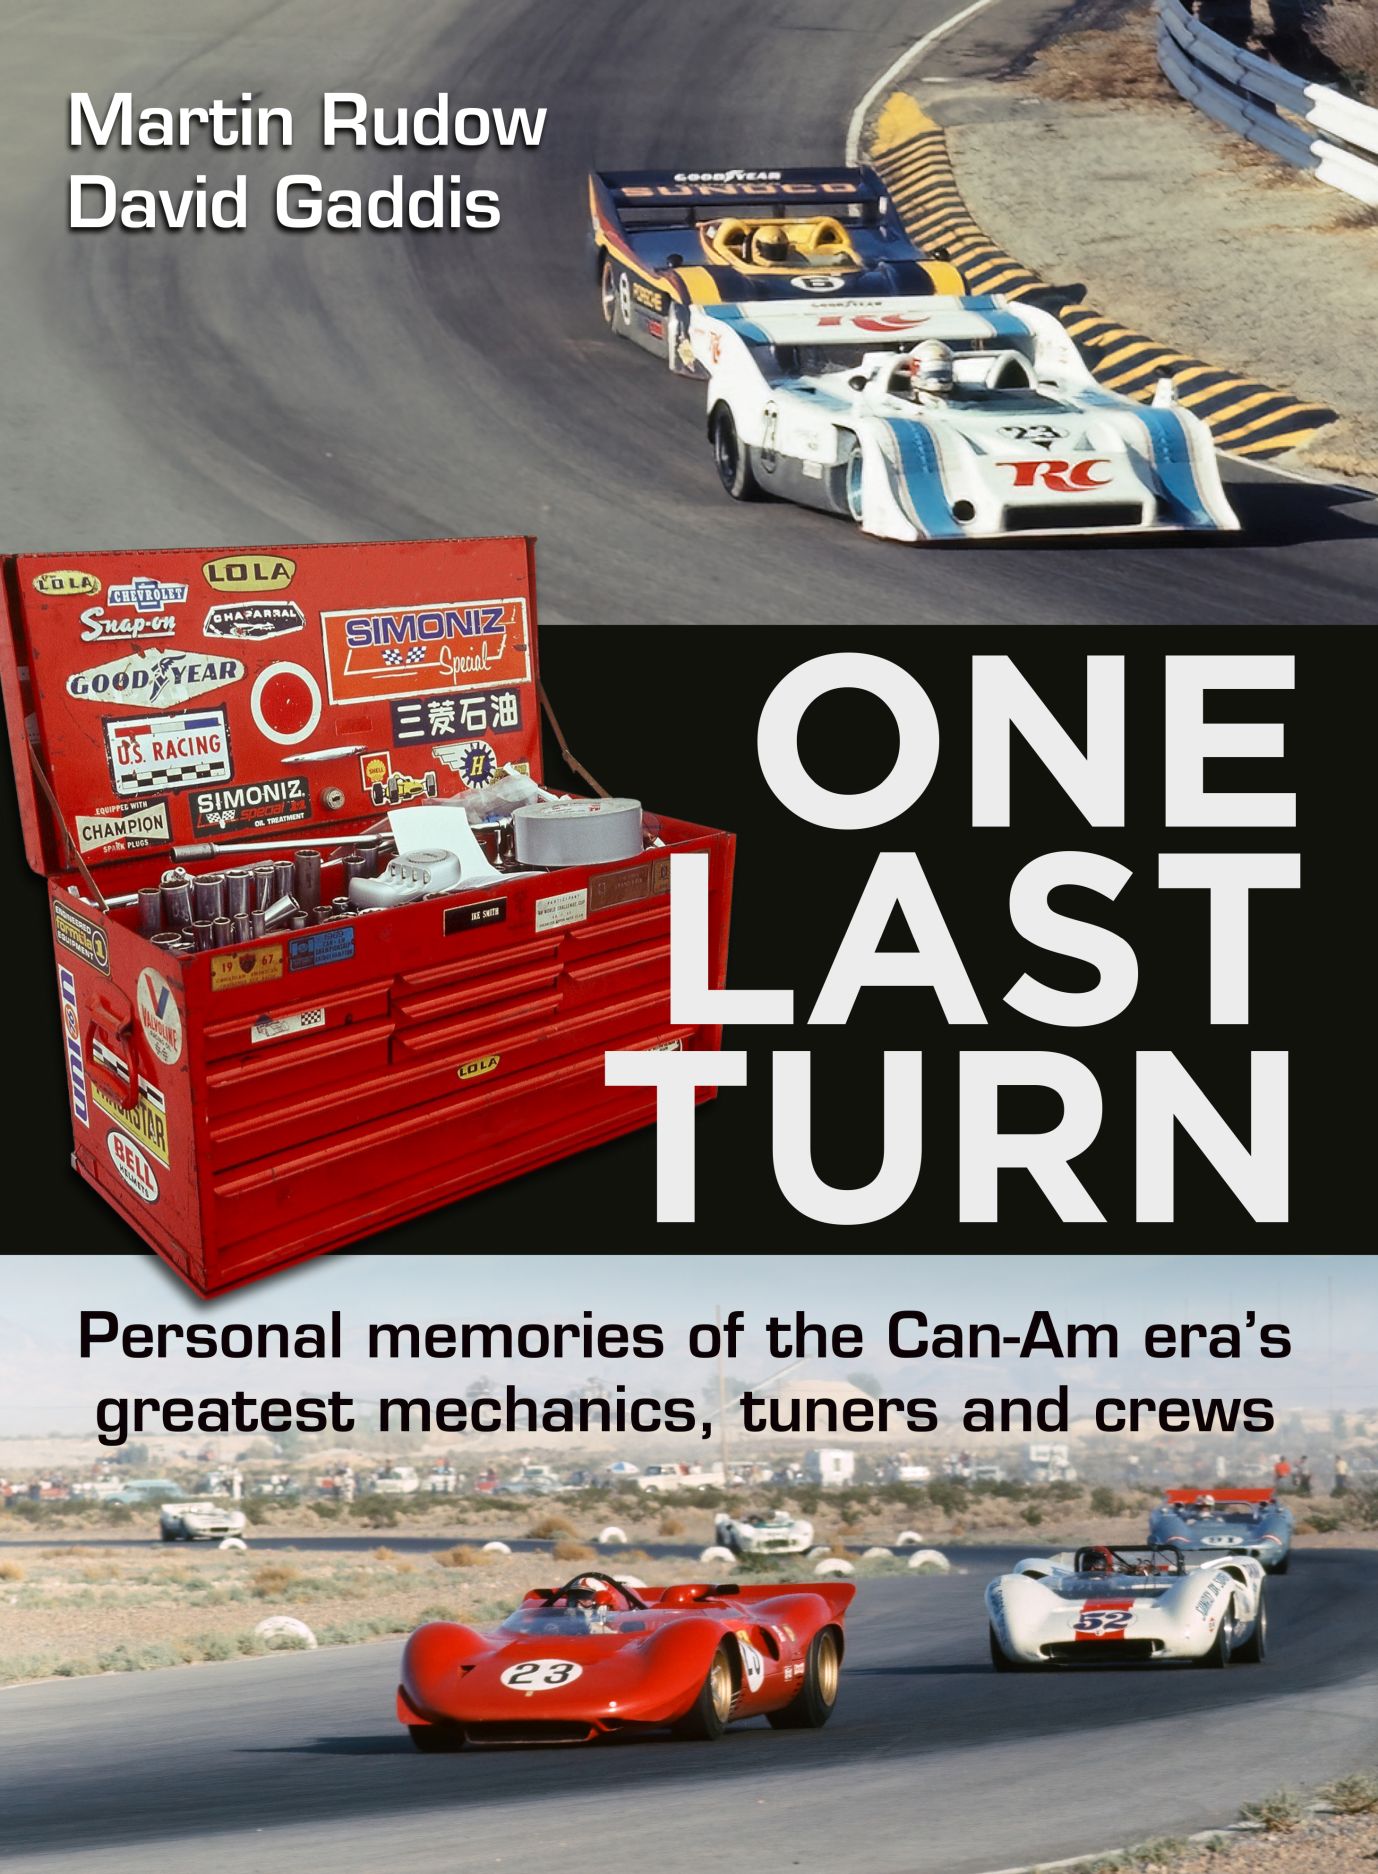 One Last Turn: the era\'s Gaddis tuners Rudow, mechanics, of crews, memories greatest and Can-Am Personal